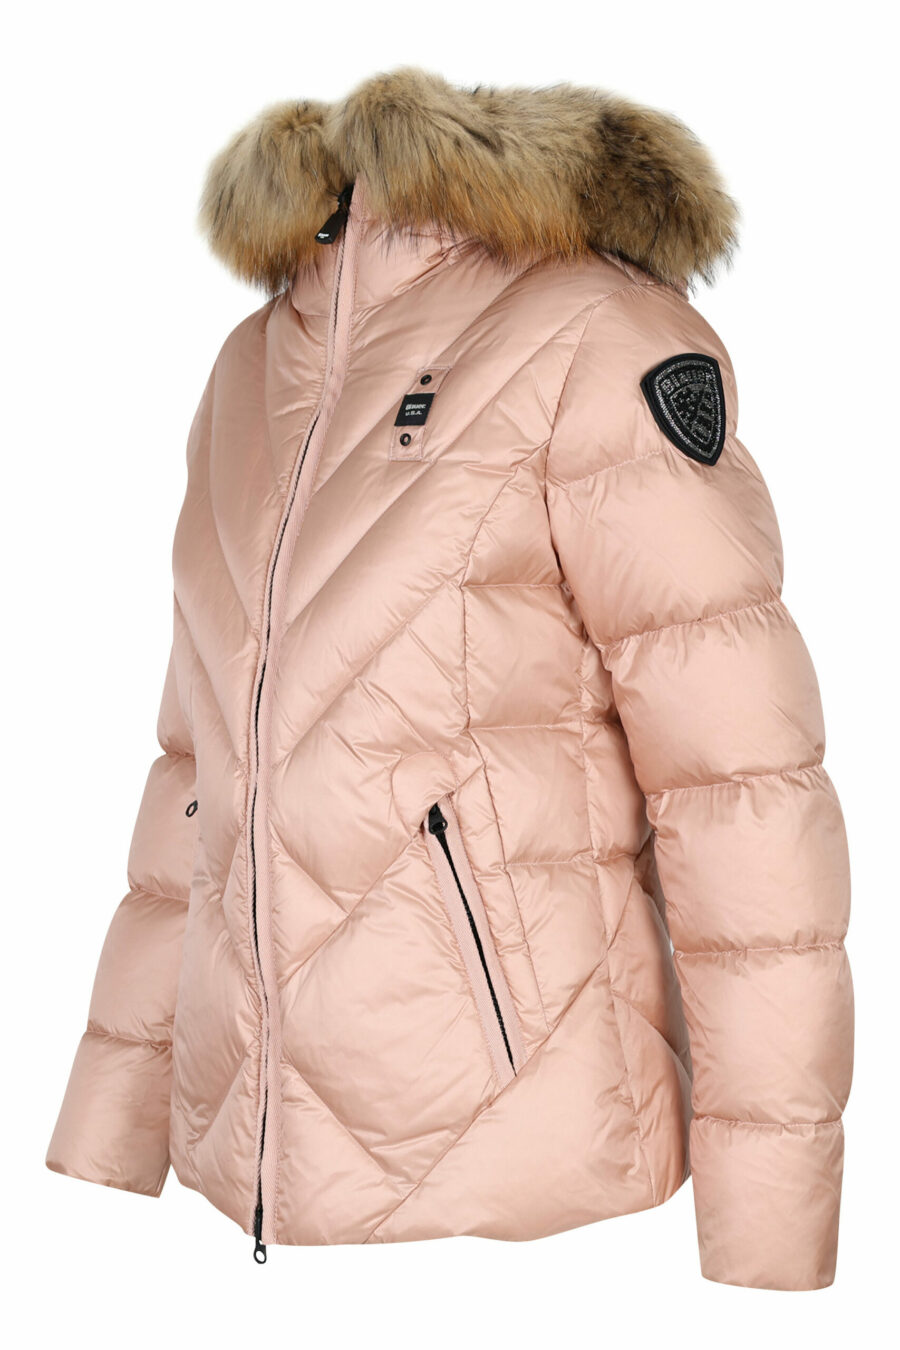 Pale pink hooded jacket with fur hood and diagonal lines and violet lining - 8058610691691 1 scaled